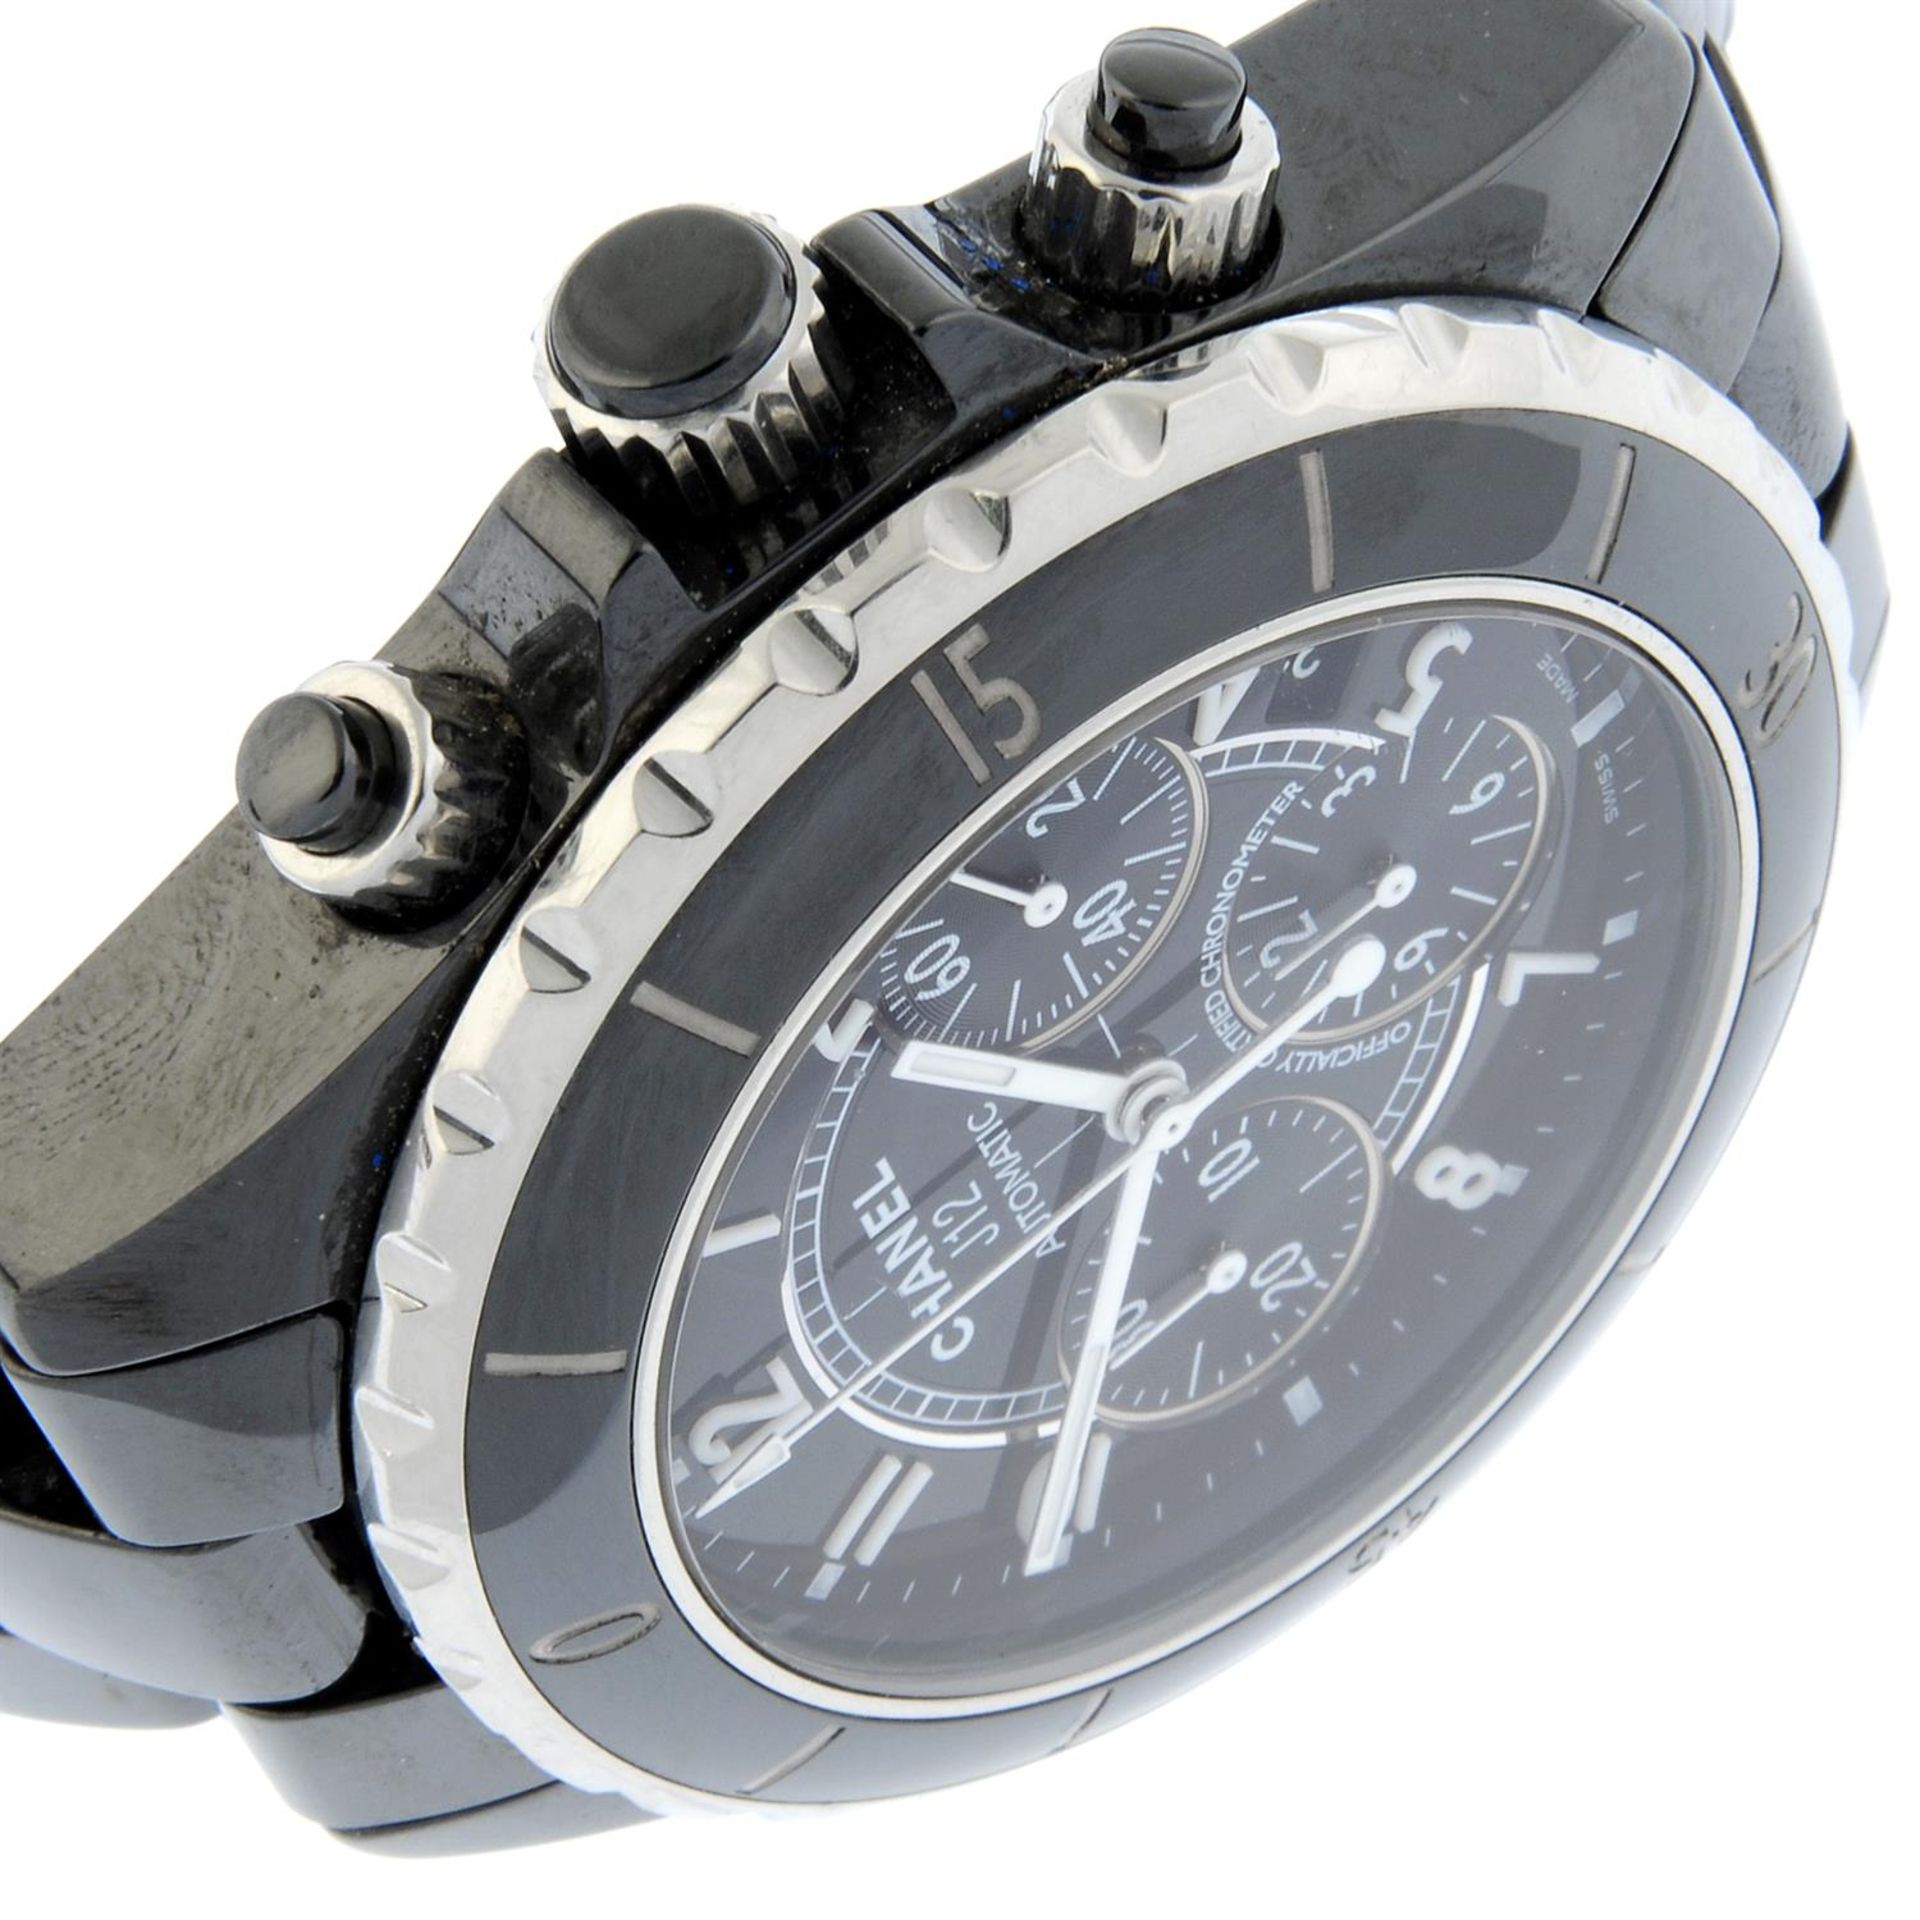 Chanel - a J12 chronograph watch, 41mm. - Image 3 of 6